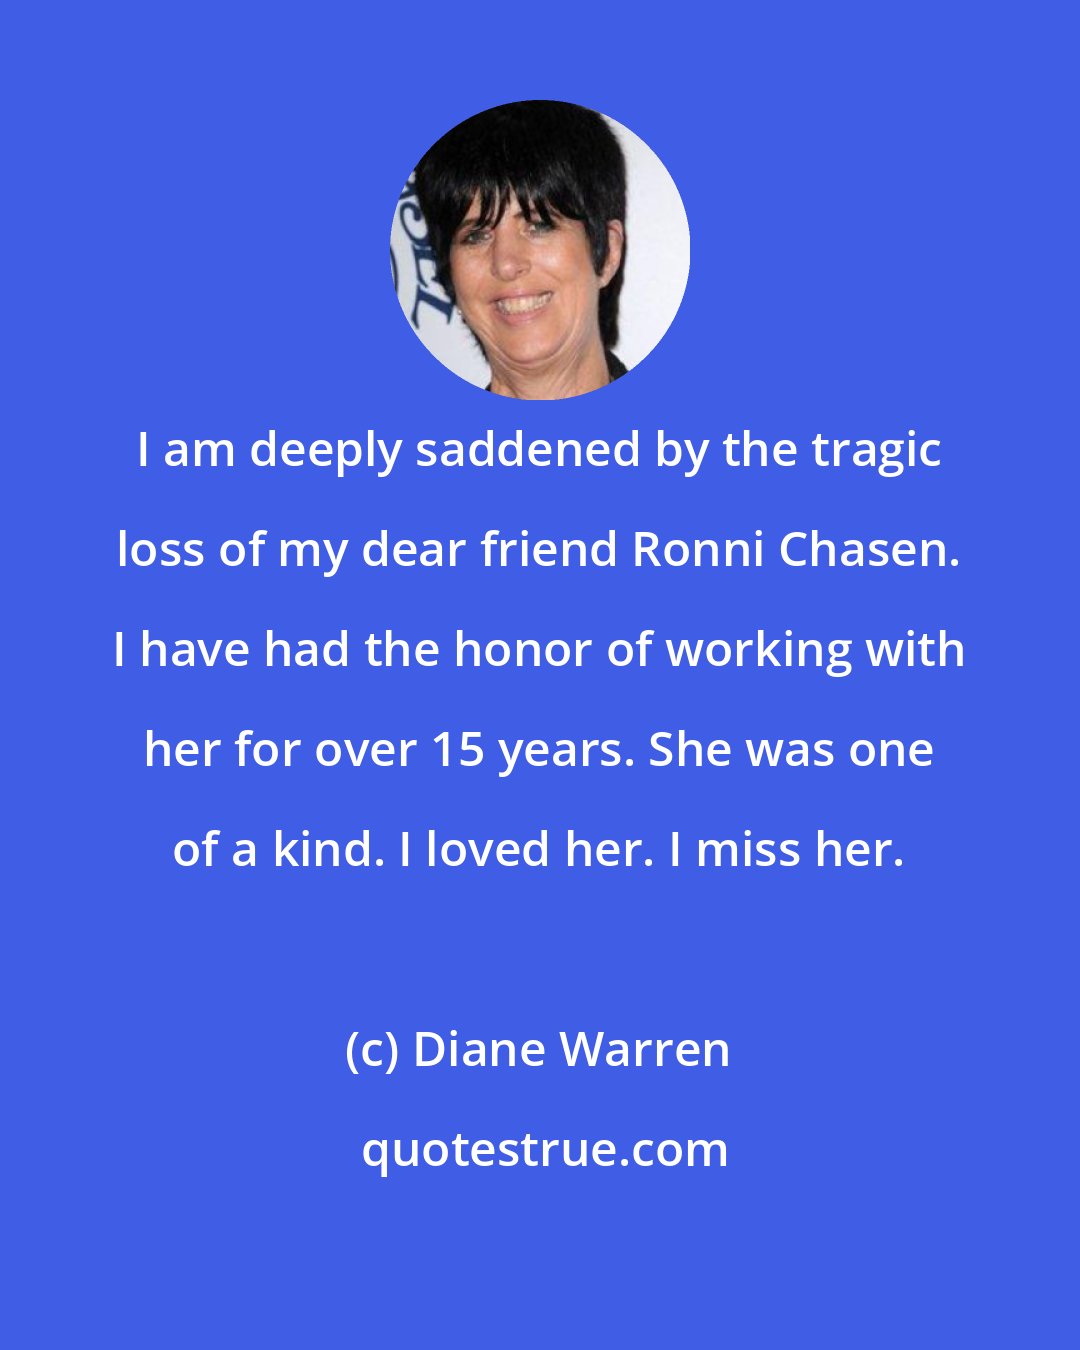 Diane Warren: I am deeply saddened by the tragic loss of my dear friend Ronni Chasen. I have had the honor of working with her for over 15 years. She was one of a kind. I loved her. I miss her.